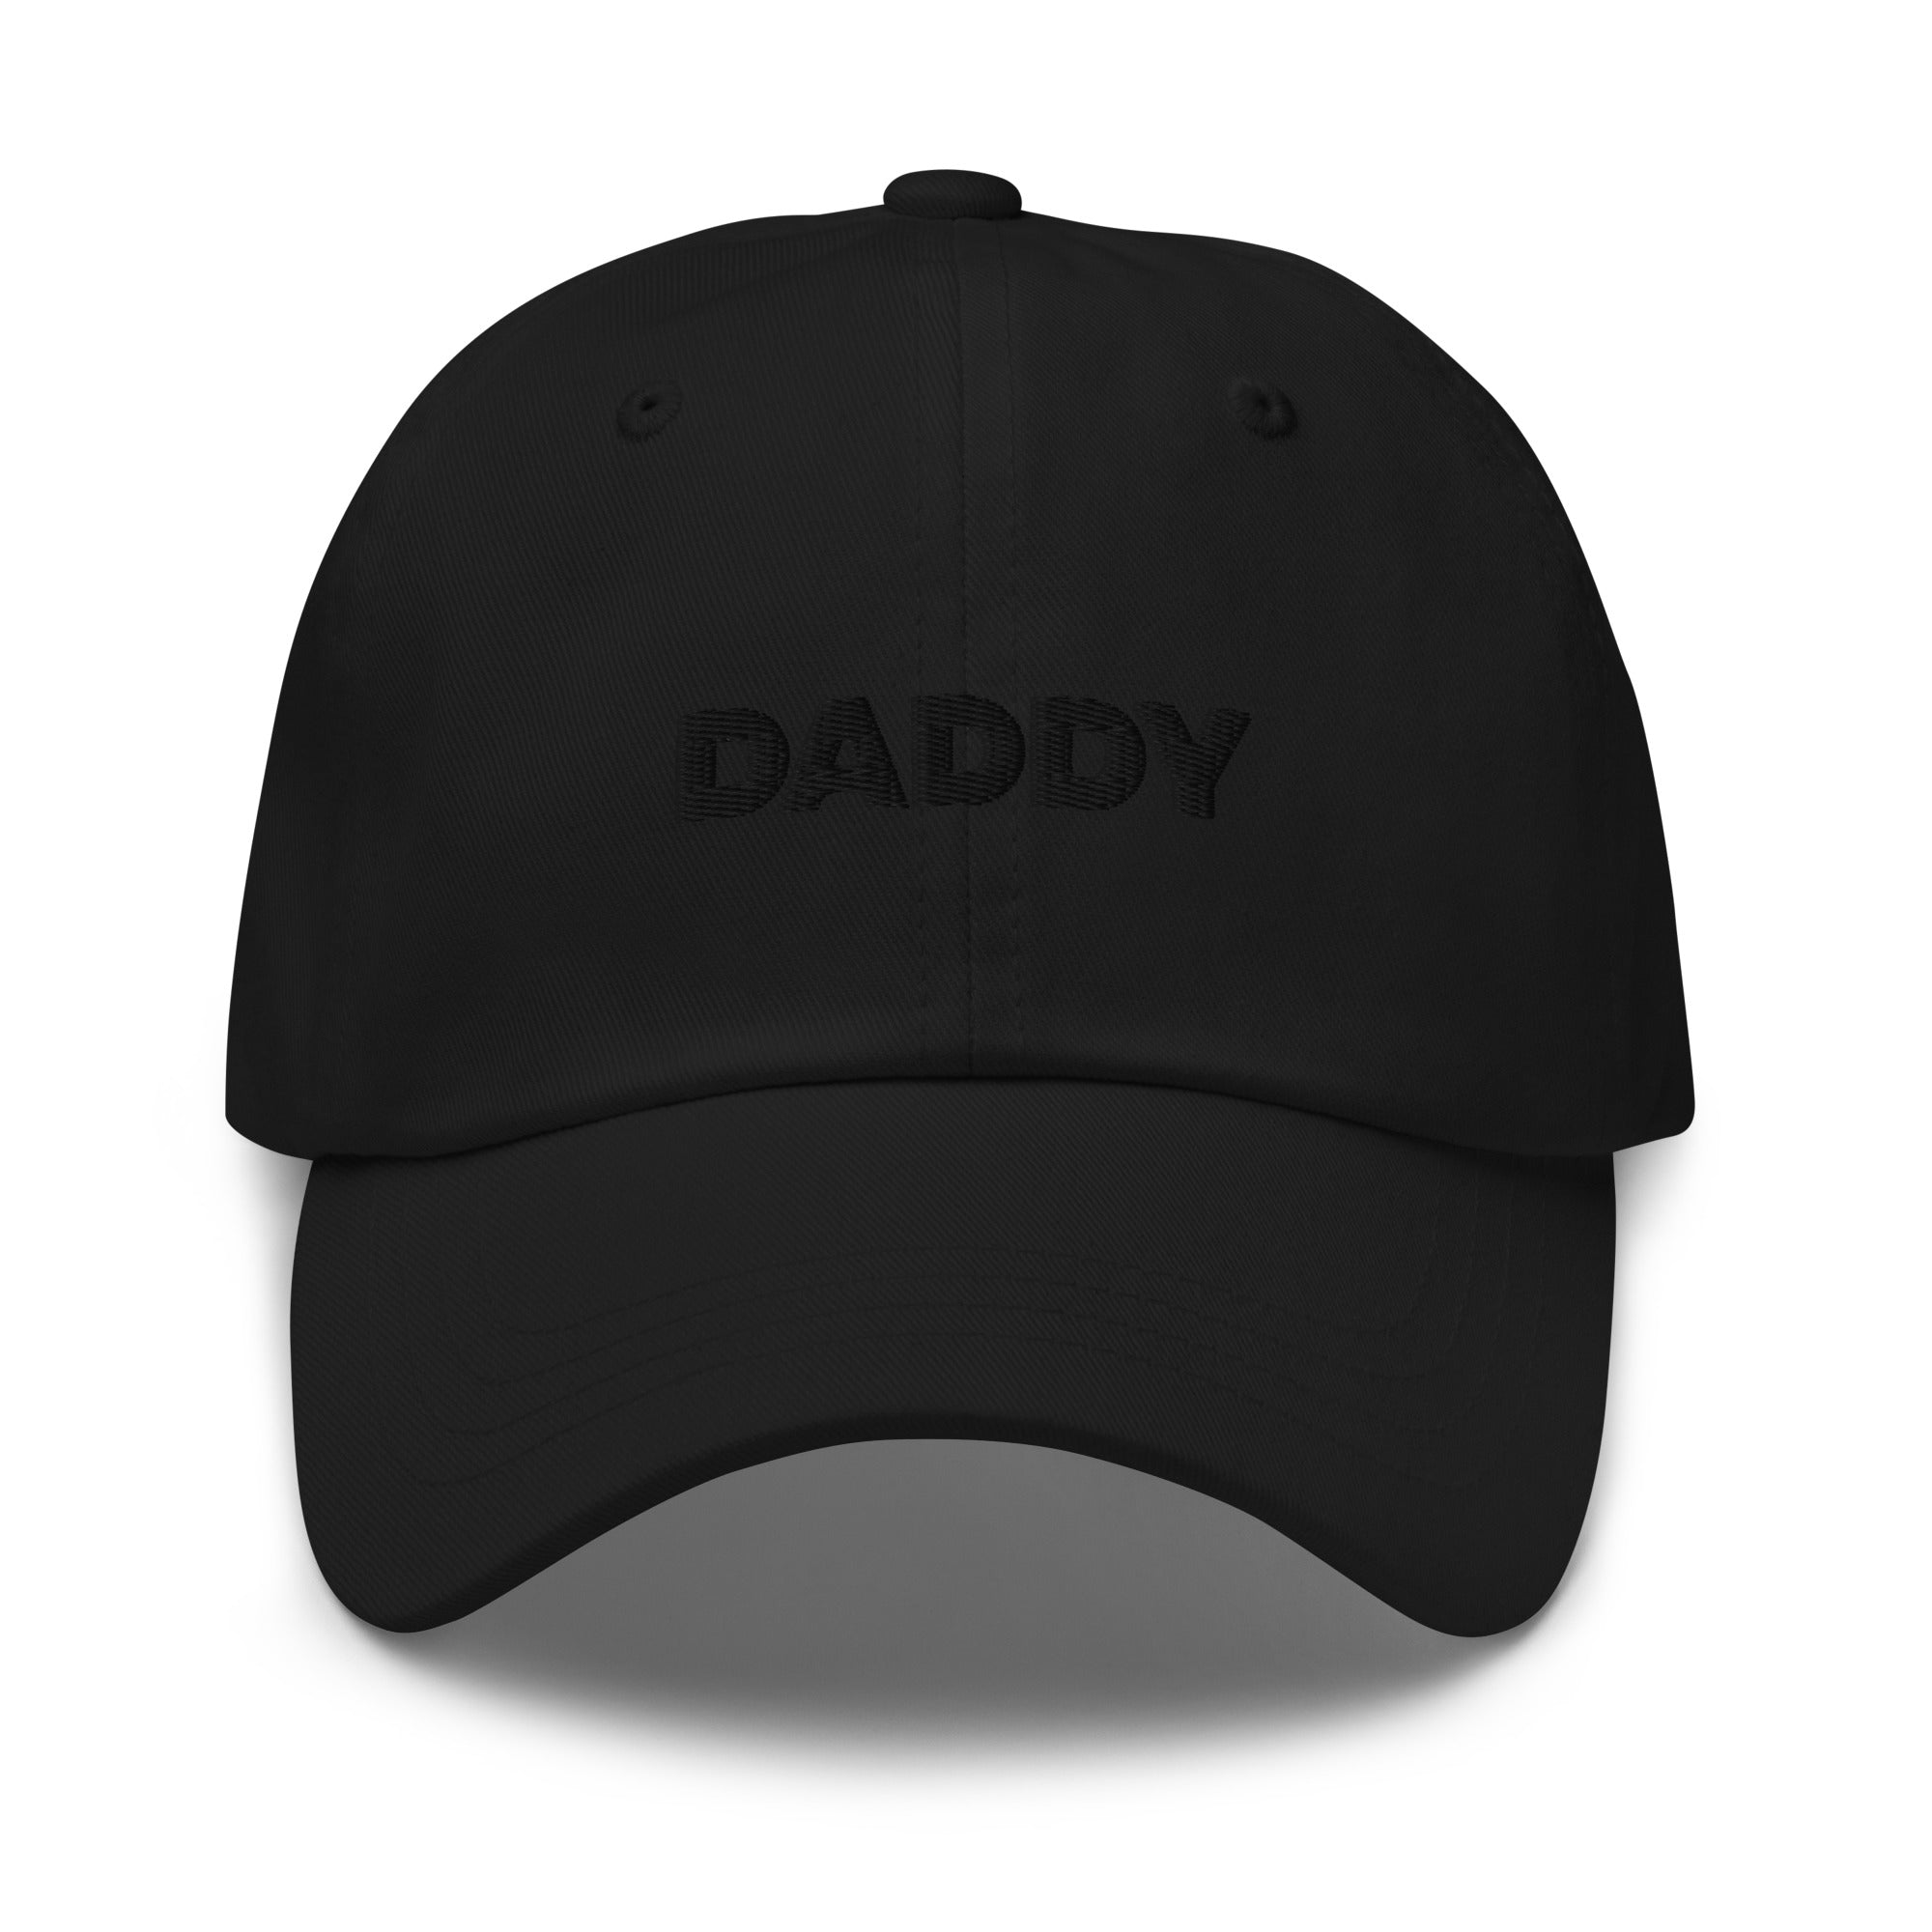 the daddy hat.